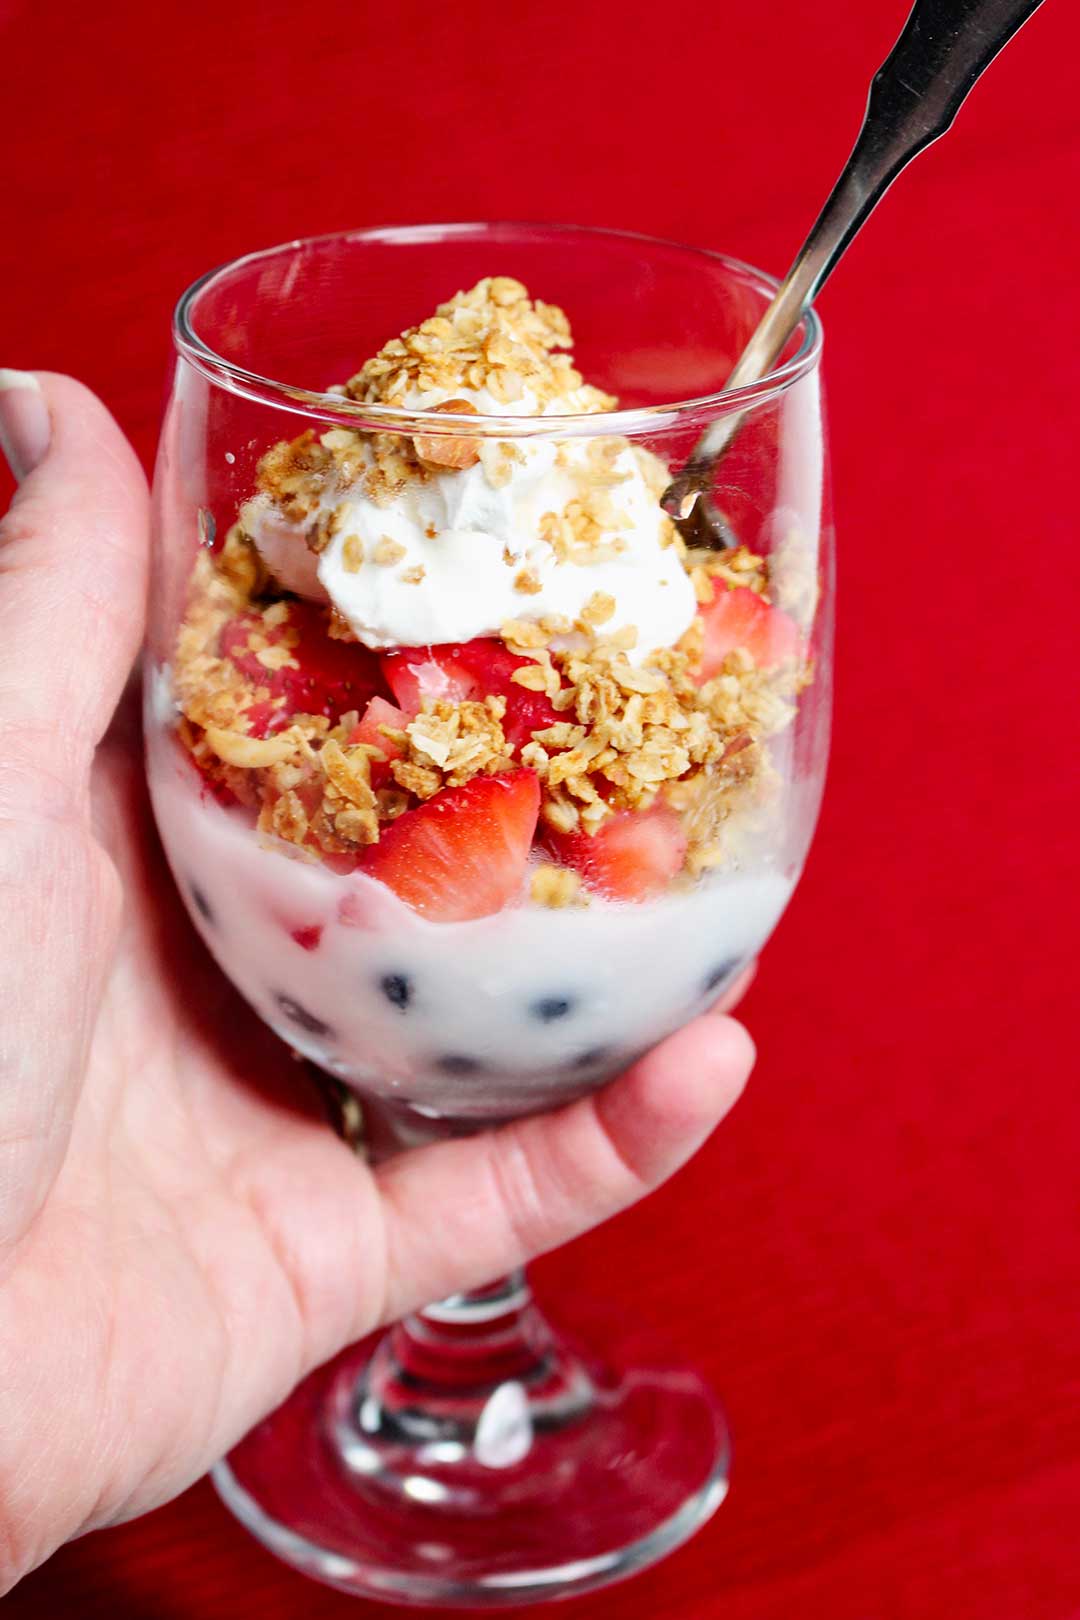 Red white and blue fruit parfaits with blueberries, strawberries, granola, and yogurt.